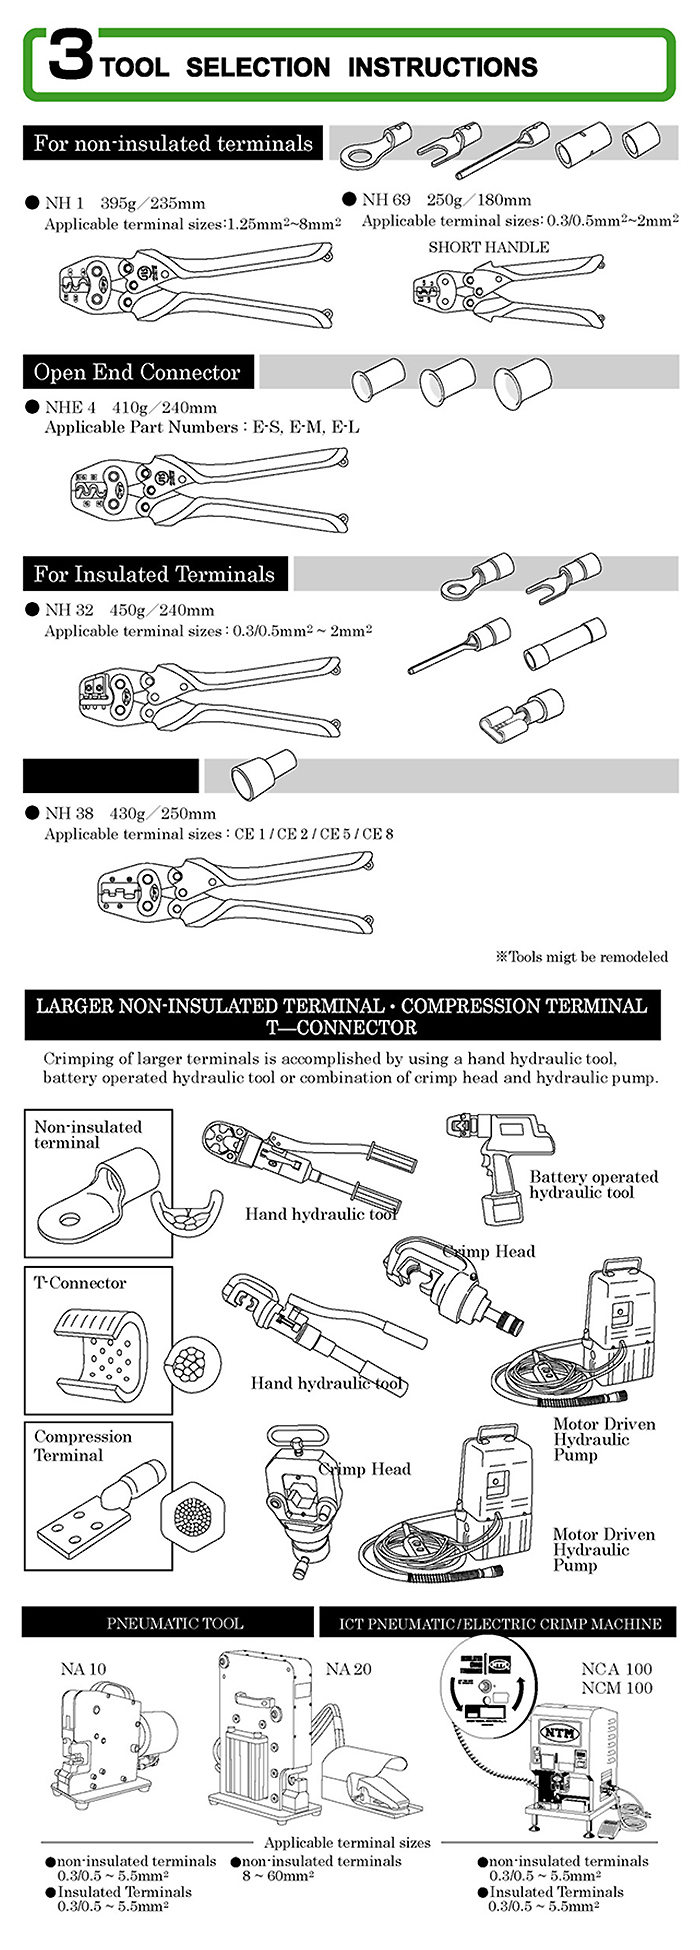 Basic Guide to Terminal Crimping 3. How to Select the Correct Assembly Tool